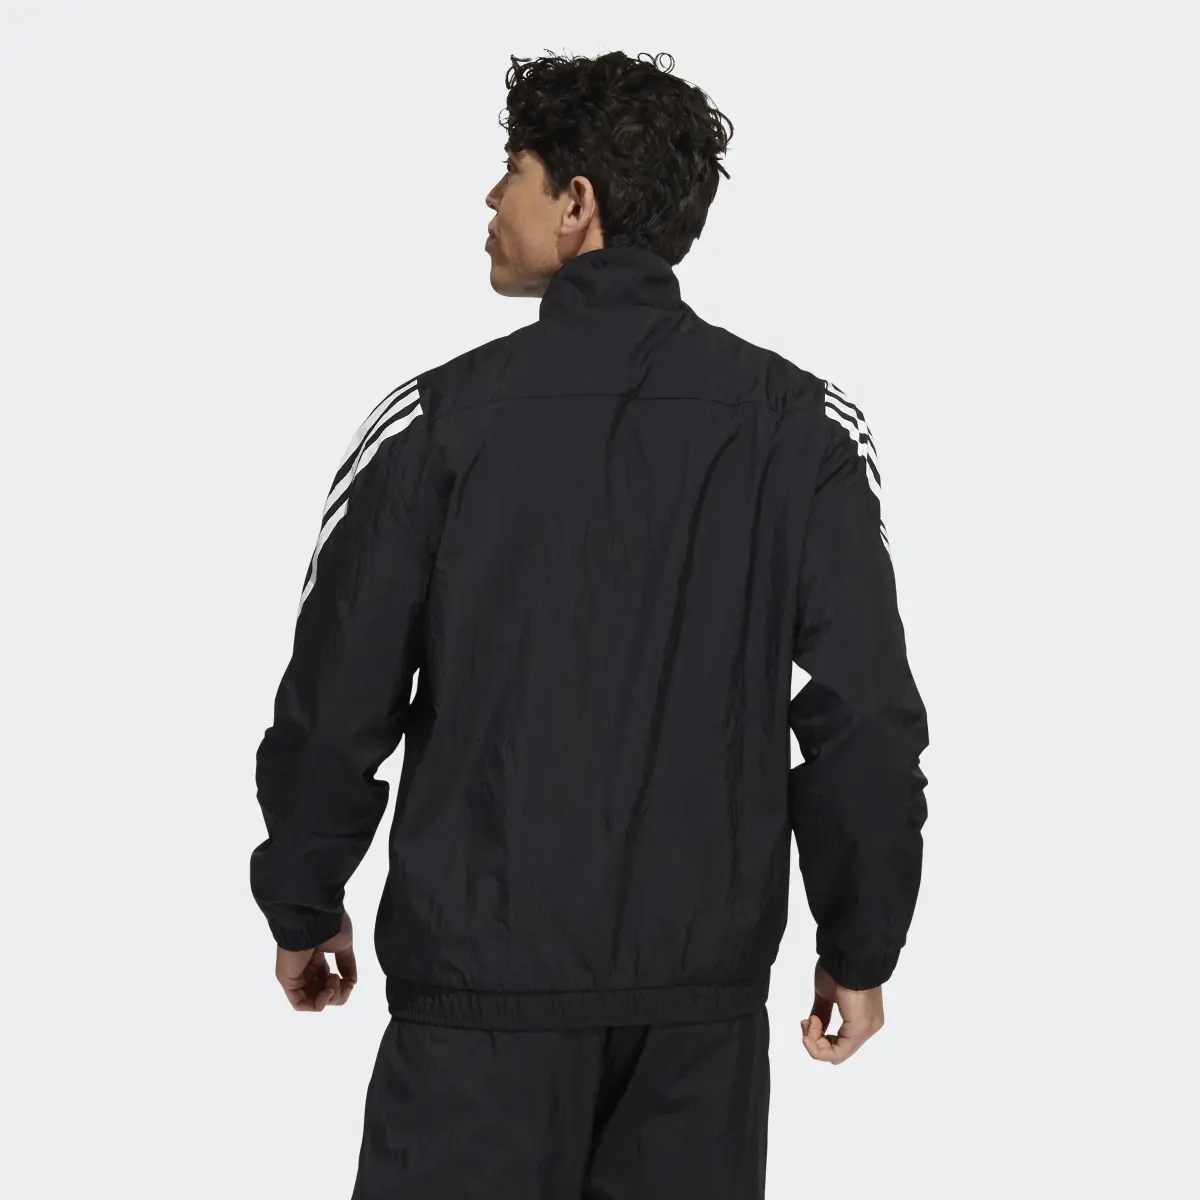 Adidas Future Icons 3-Stripes Woven Track Top. 3